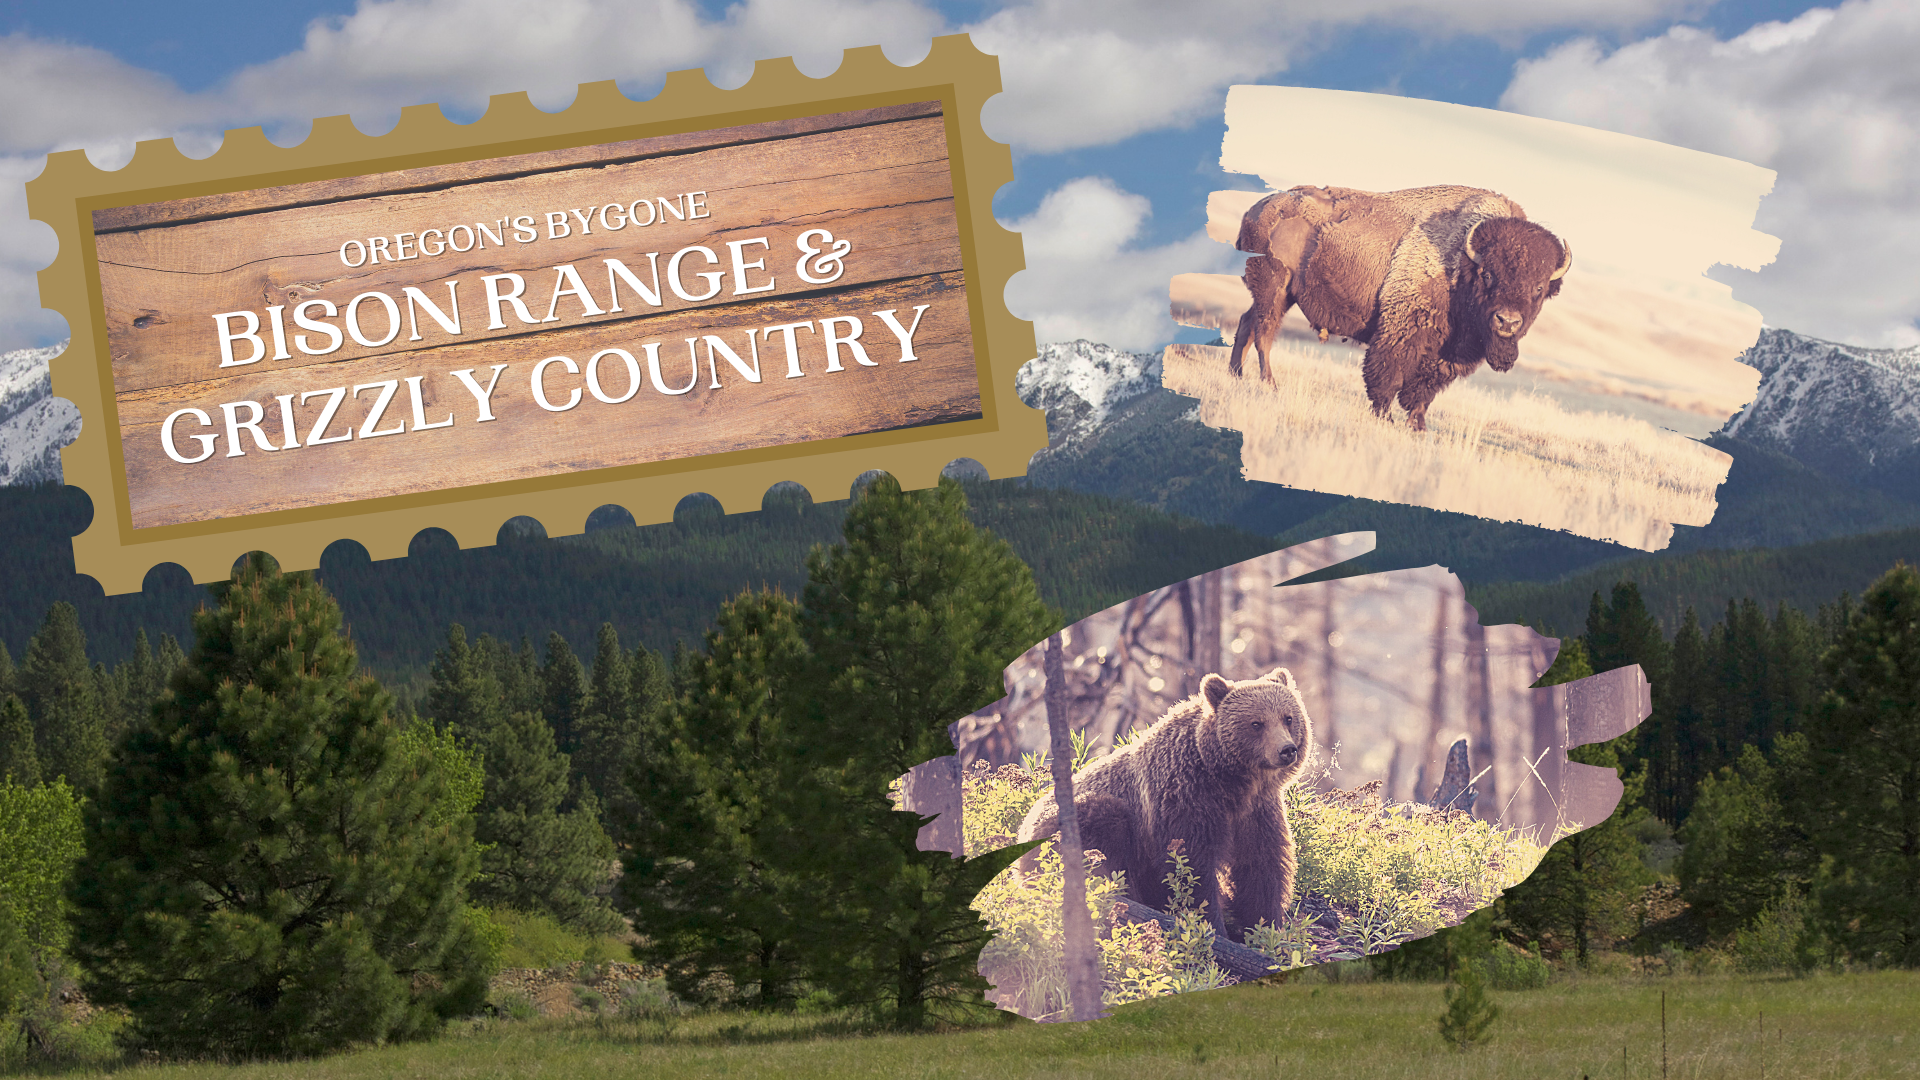 A bison and grizzly are pictured next to the title Oregon as Bygone Bison and Grizzly Country